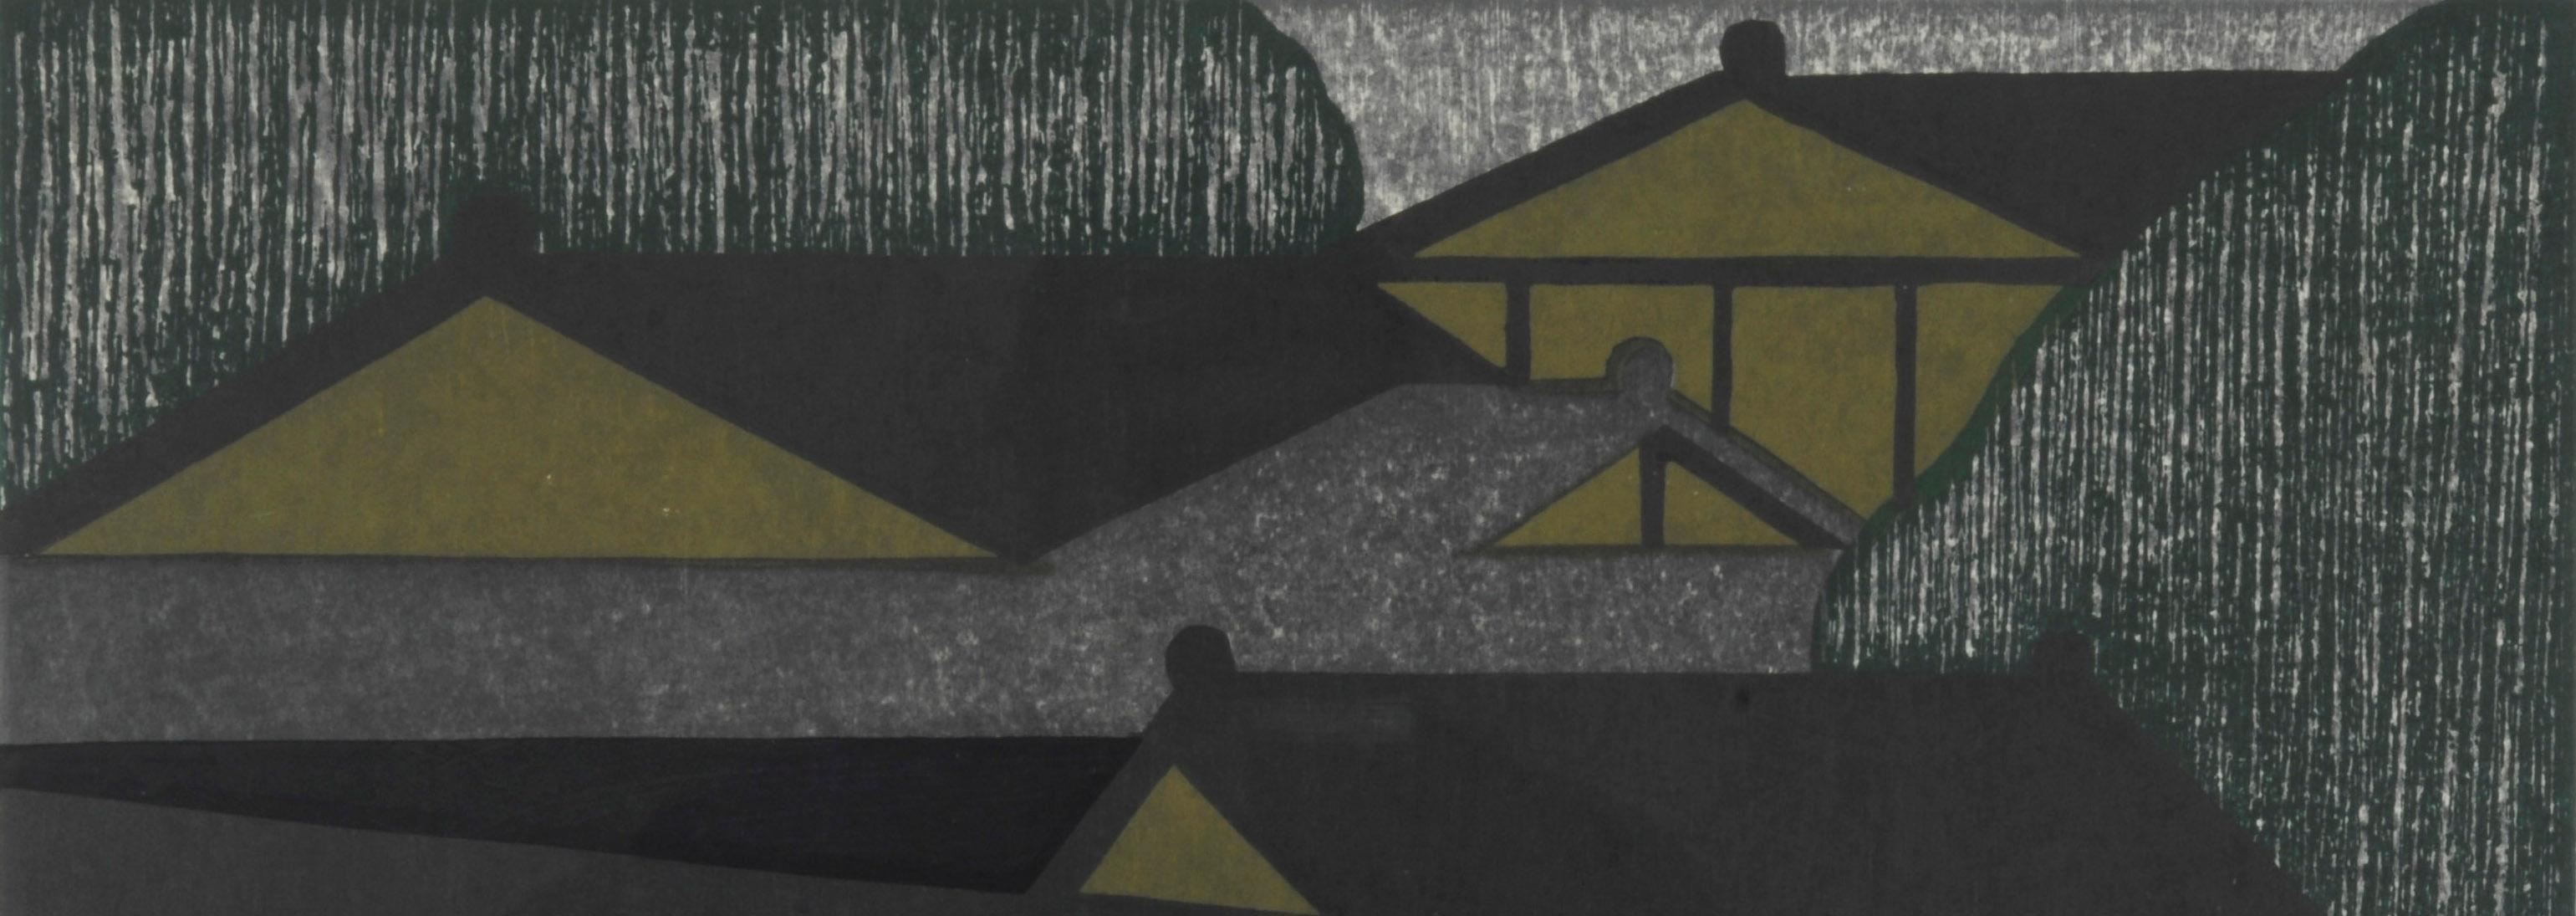 House in Kyoto
Color woodcut, 1963
Signed in white brush bottom left of image, along with the artist's red stamp (see photo)
Titled, dated and numbered in pencil bottom margin (see photos)
Edition: 100 (69/100) (see photo)
Condition: